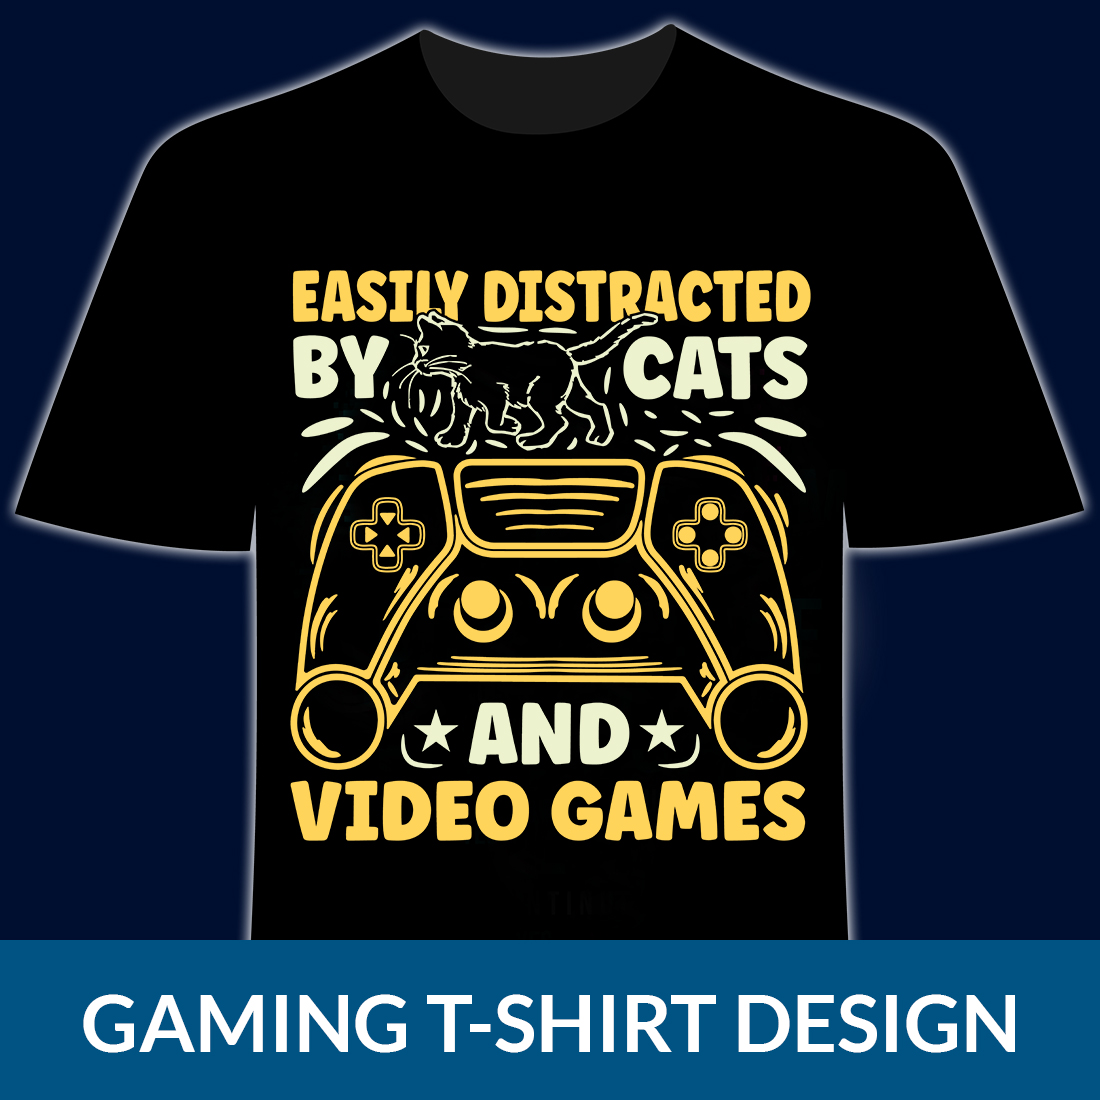 Gaming T-Shirt Design cover image.